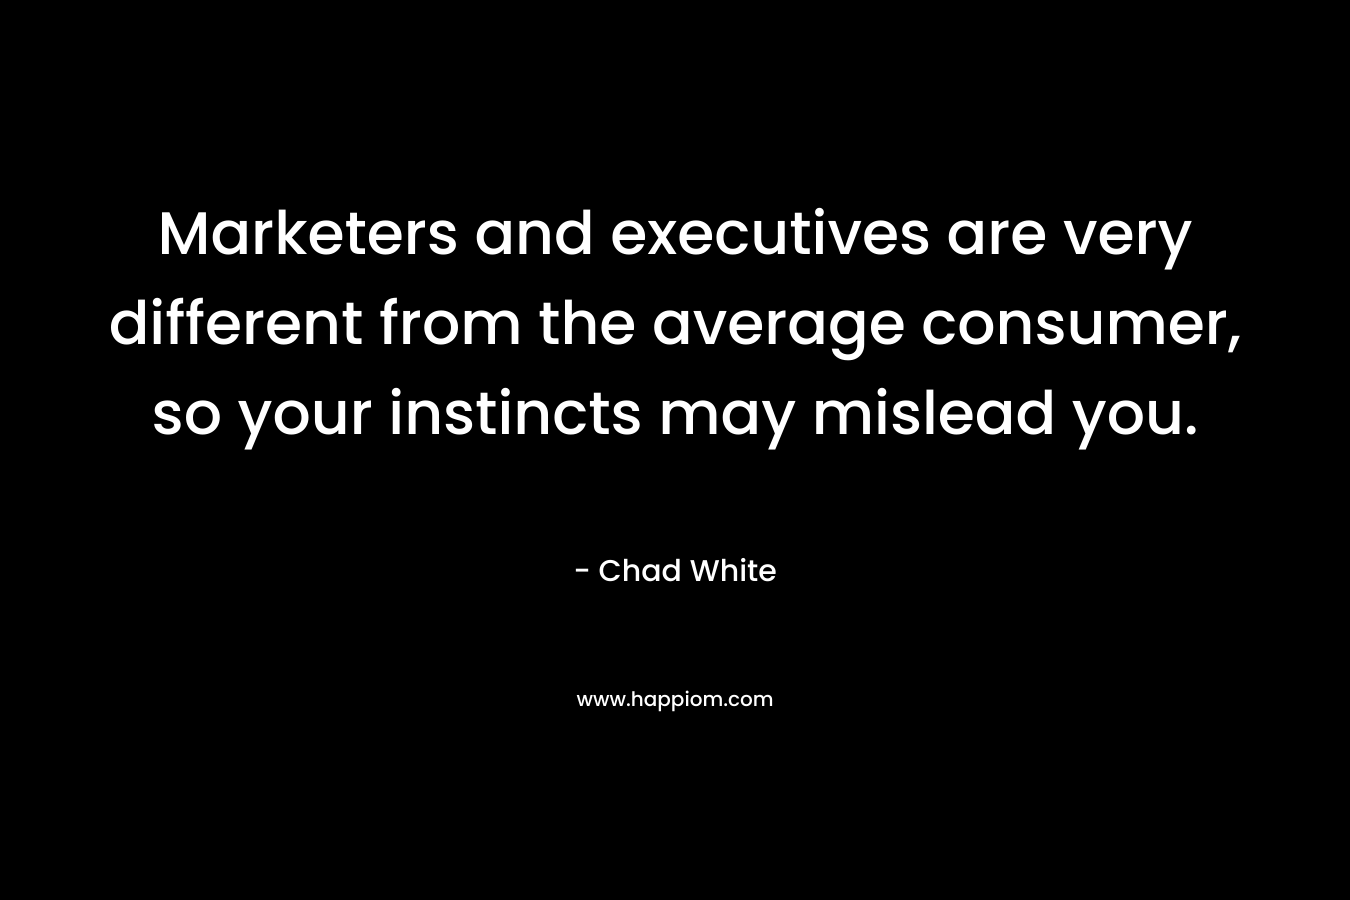 Marketers and executives are very different from the average consumer, so your instincts may mislead you. – Chad White